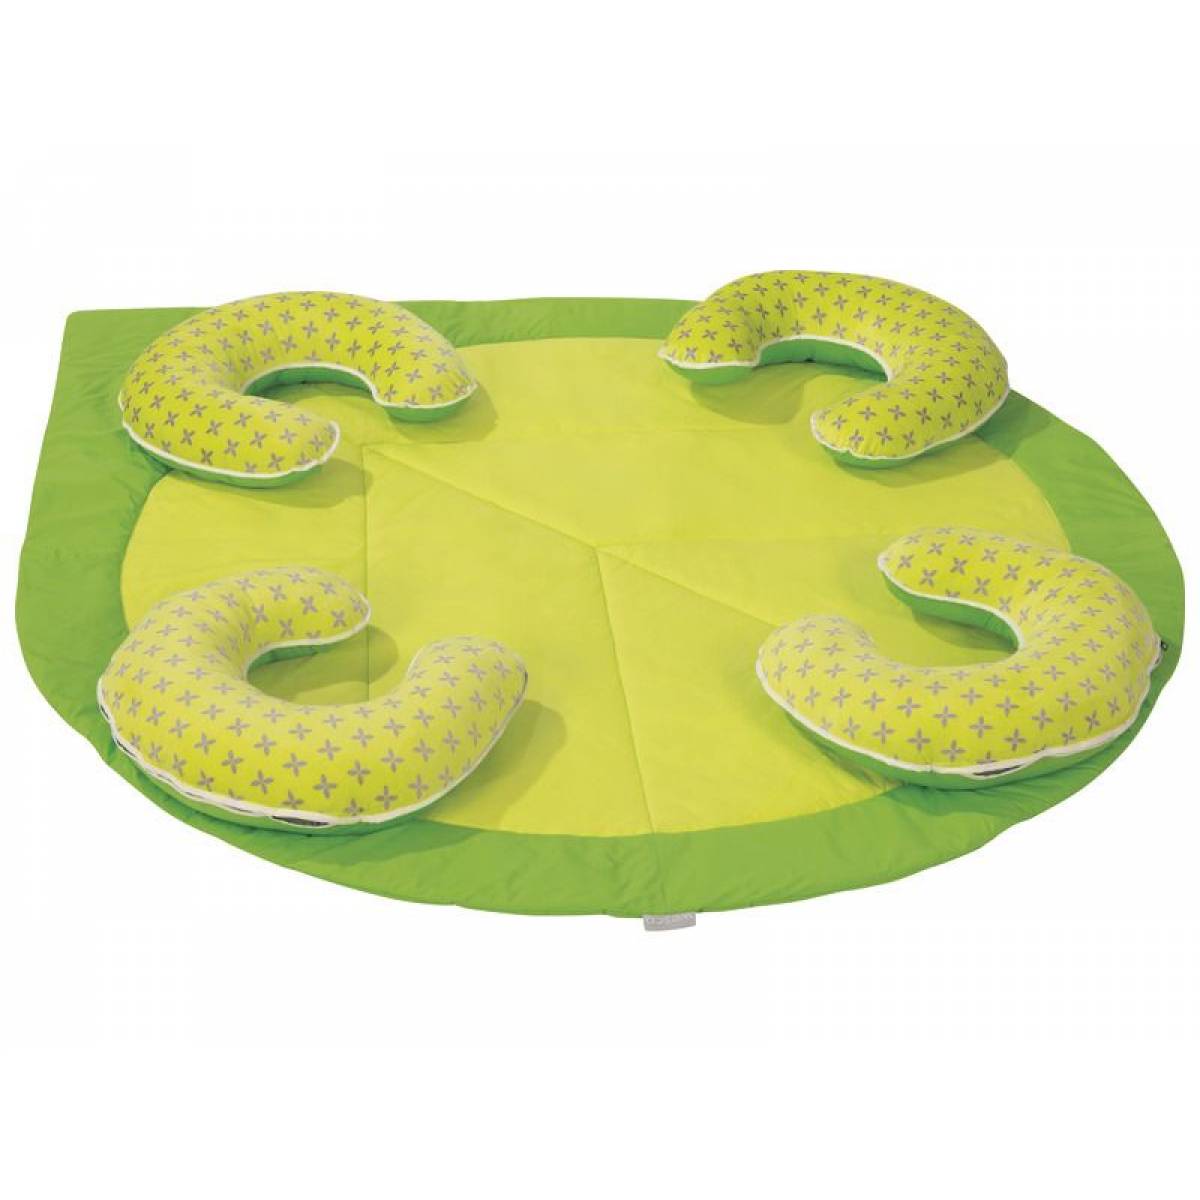 Group Baby Support Cushion Mat